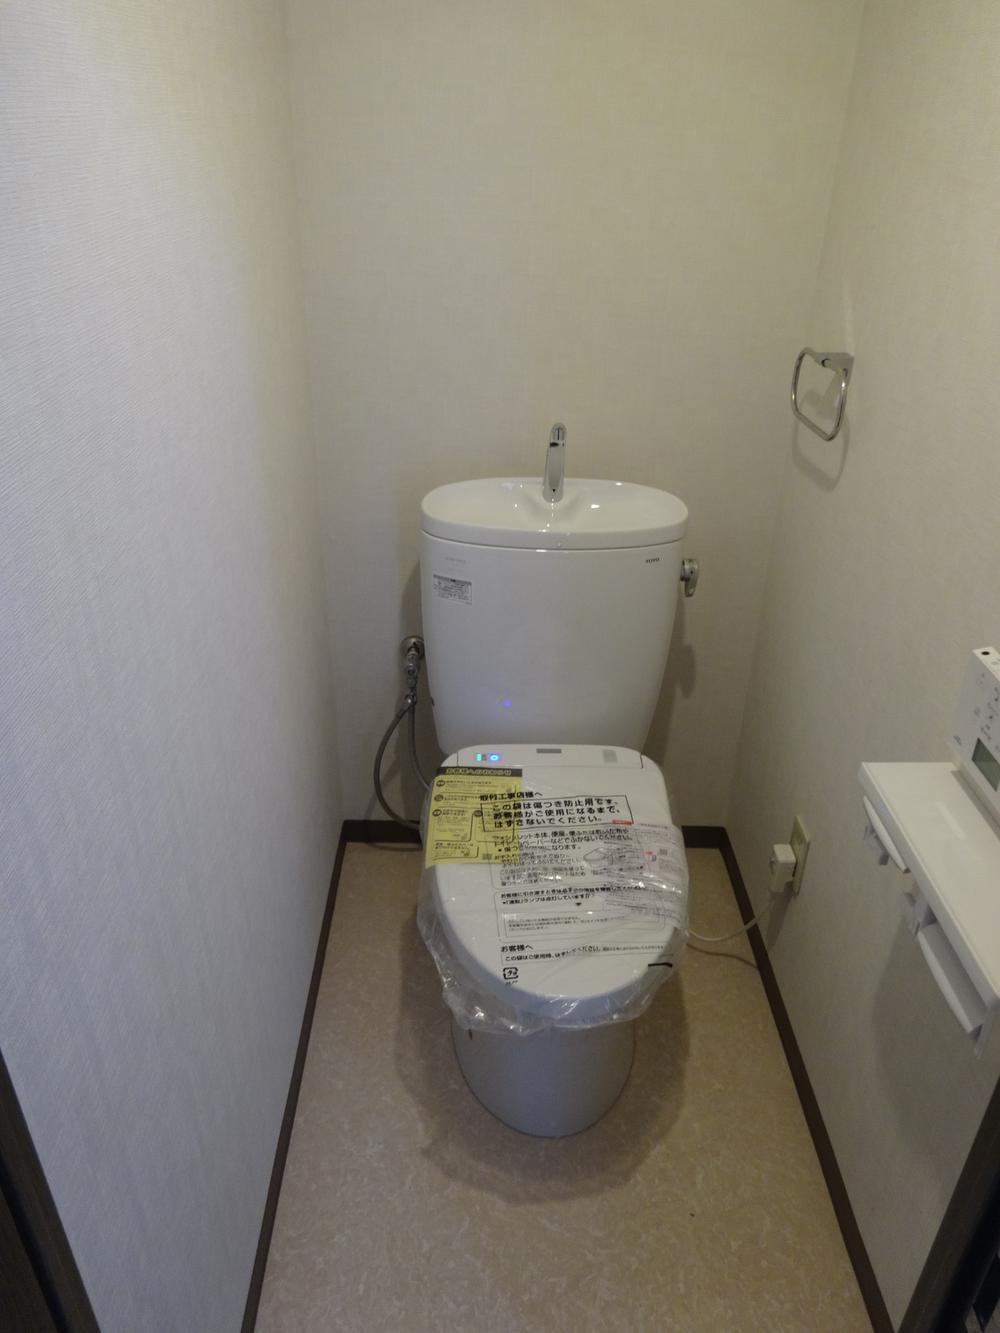 Toilet. Toilet was also replaced with a new one in 2013 December.